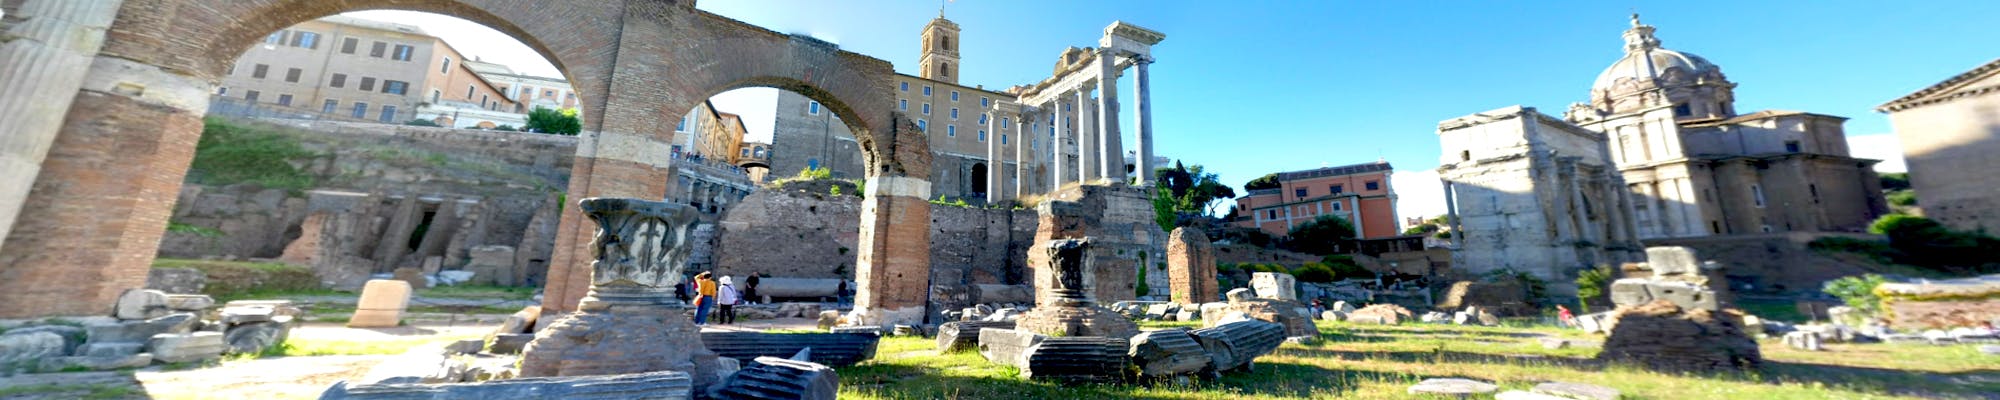 Virtual tour of the Roman Forum from home